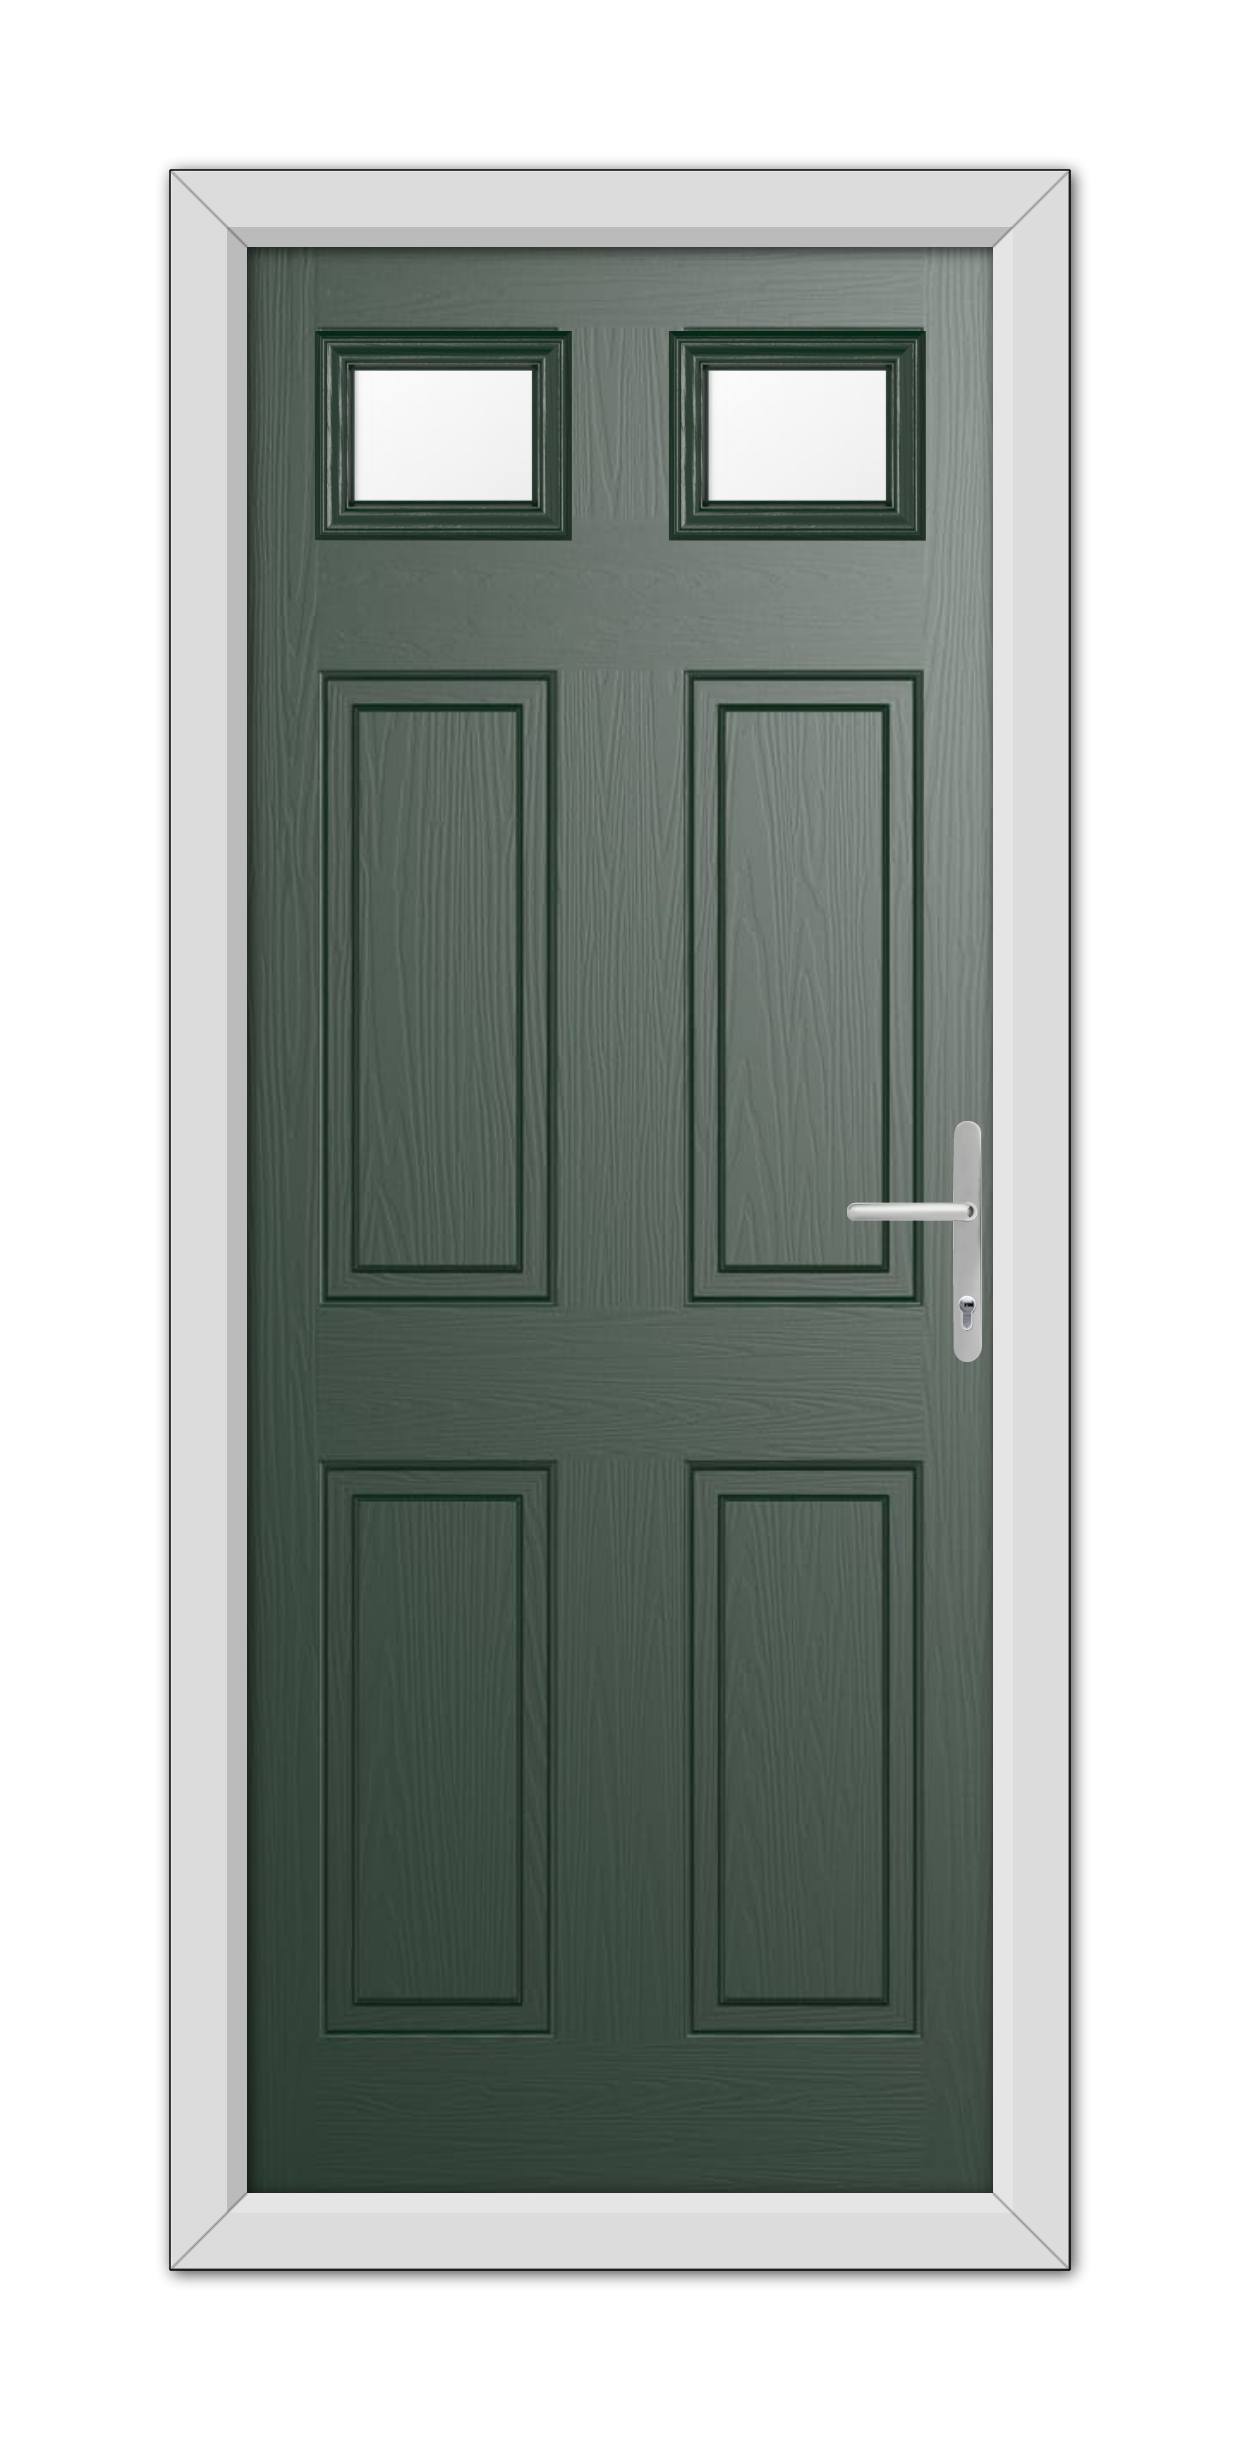 A modern Green Middleton Glazed 2 Composite Door 48mm Timber Core with four panels, three glass windows, and a white frame, equipped with a silver handle on the right.